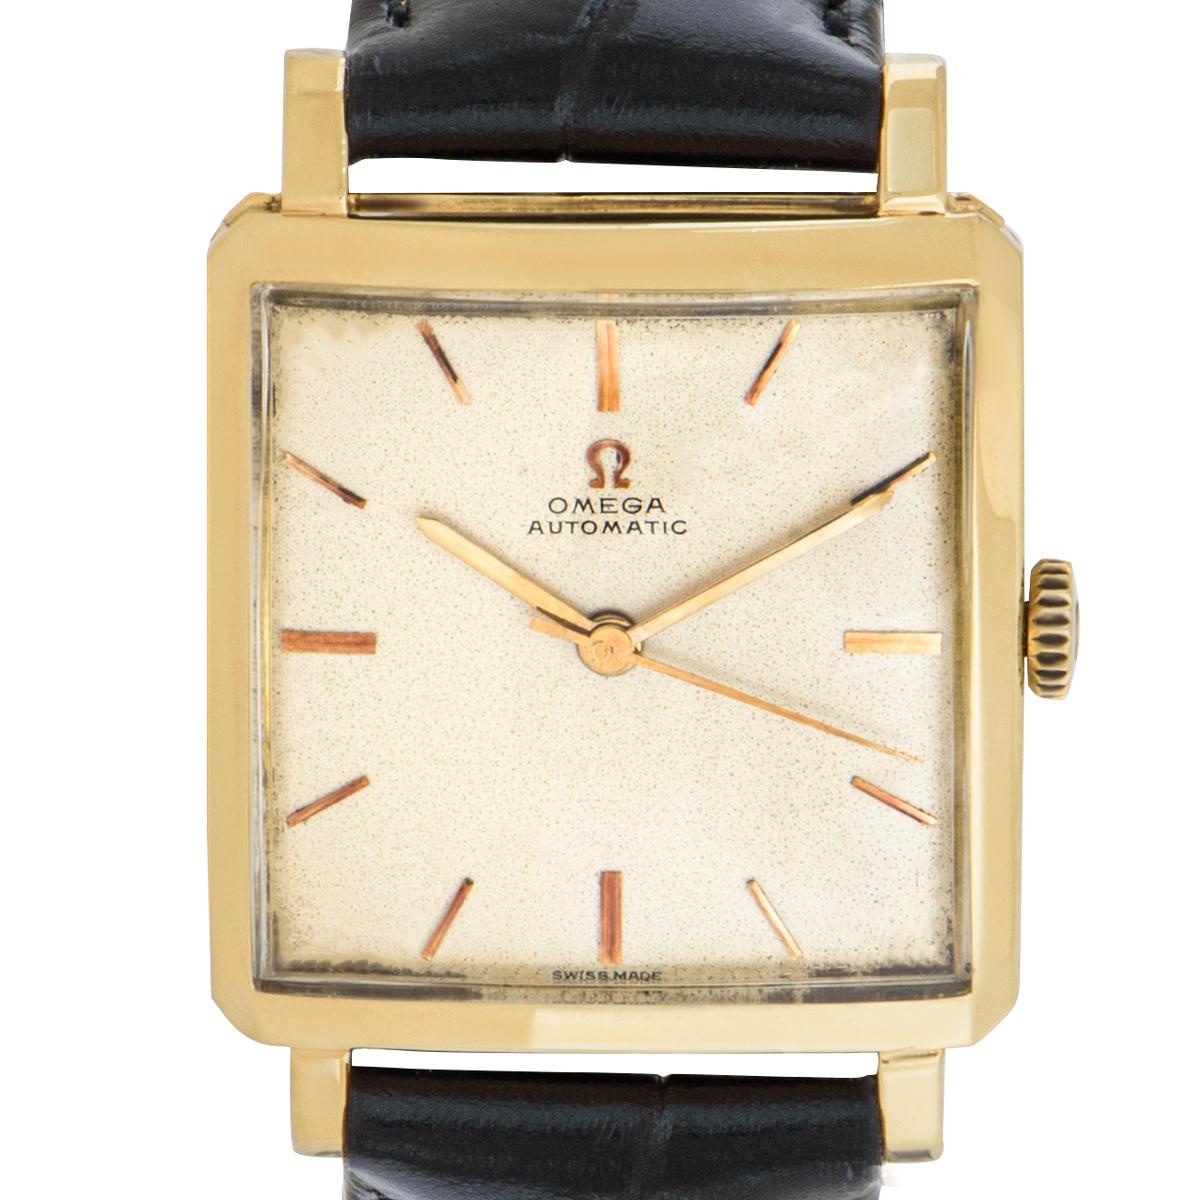 A vintage Omega wristwatch crafted in yellow gold. Featuring a silver dial with applied hour markers which is encased with a plastic glass. This piece is presented on a black generic leather strap and a generic pin buckle.

In excellent condition,